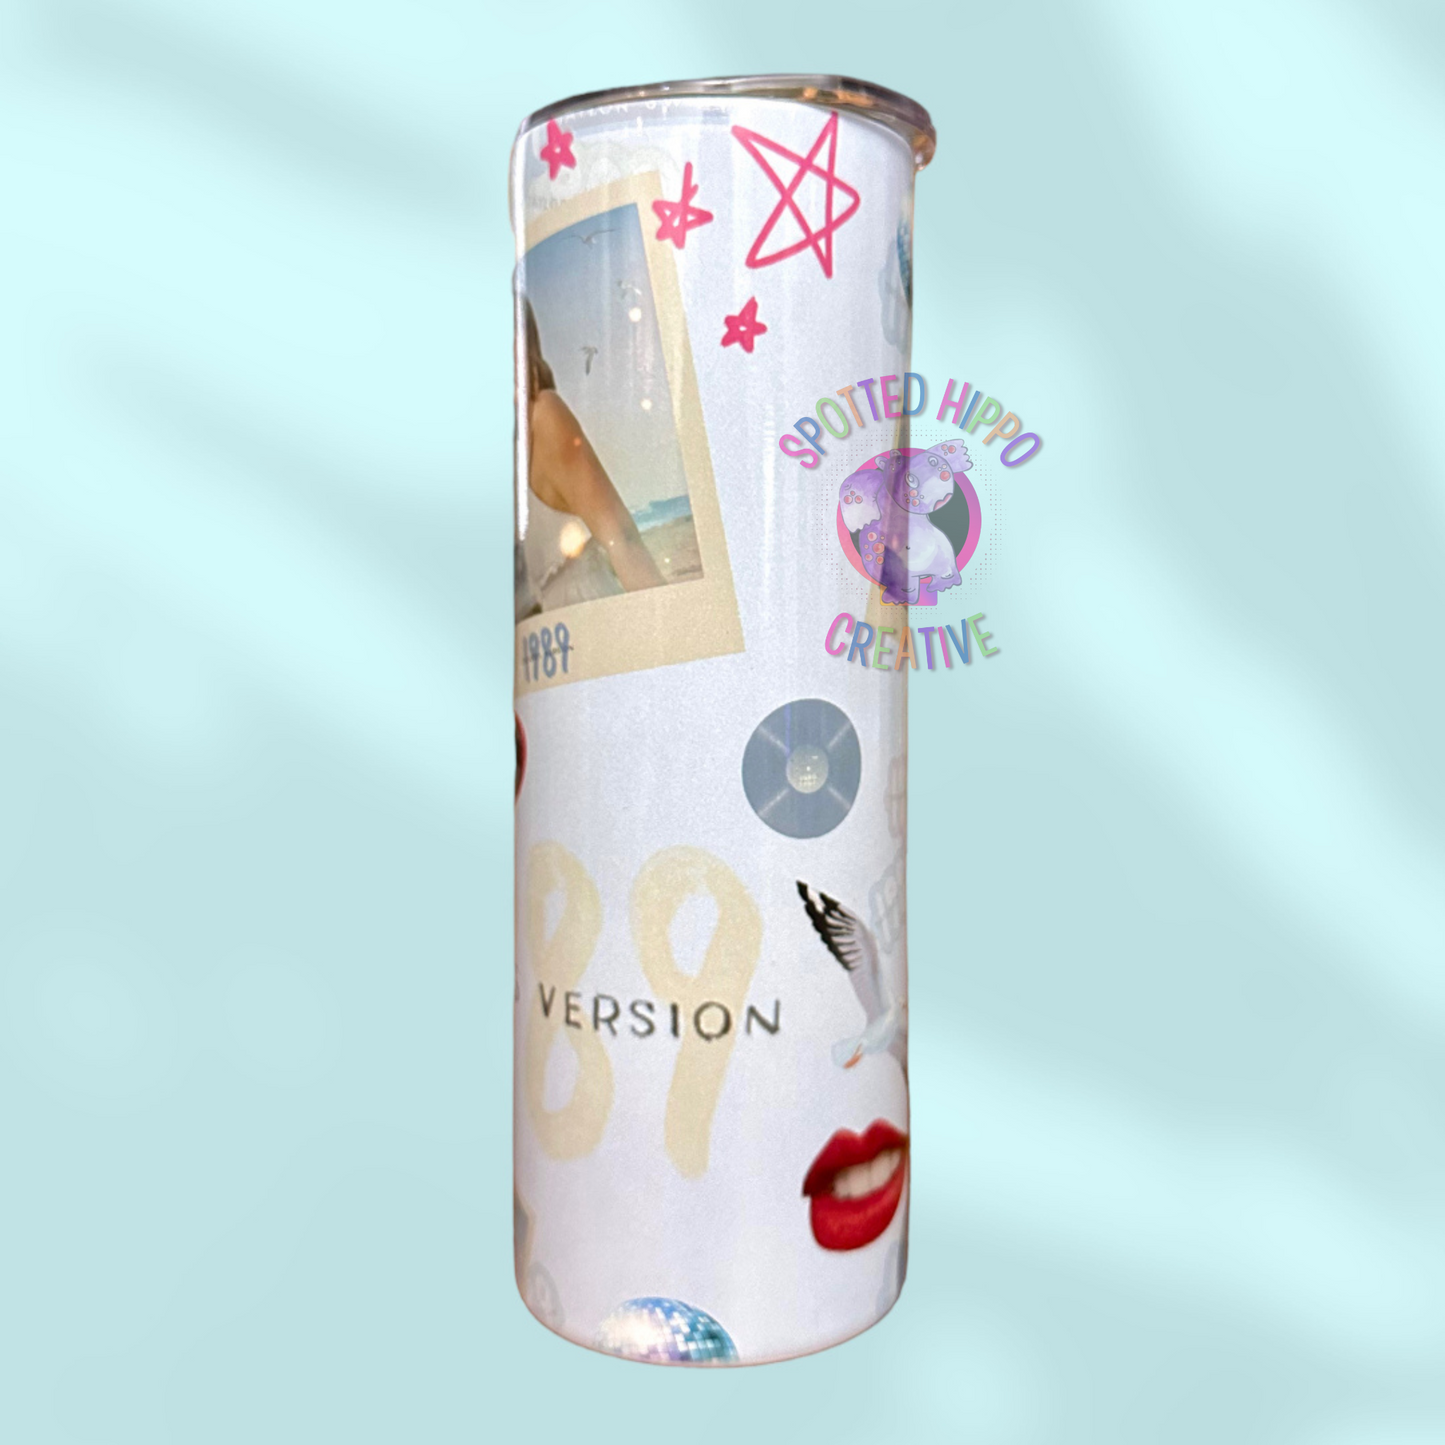 1989 Taylor’s Version Inspired Sublimation Tumbler